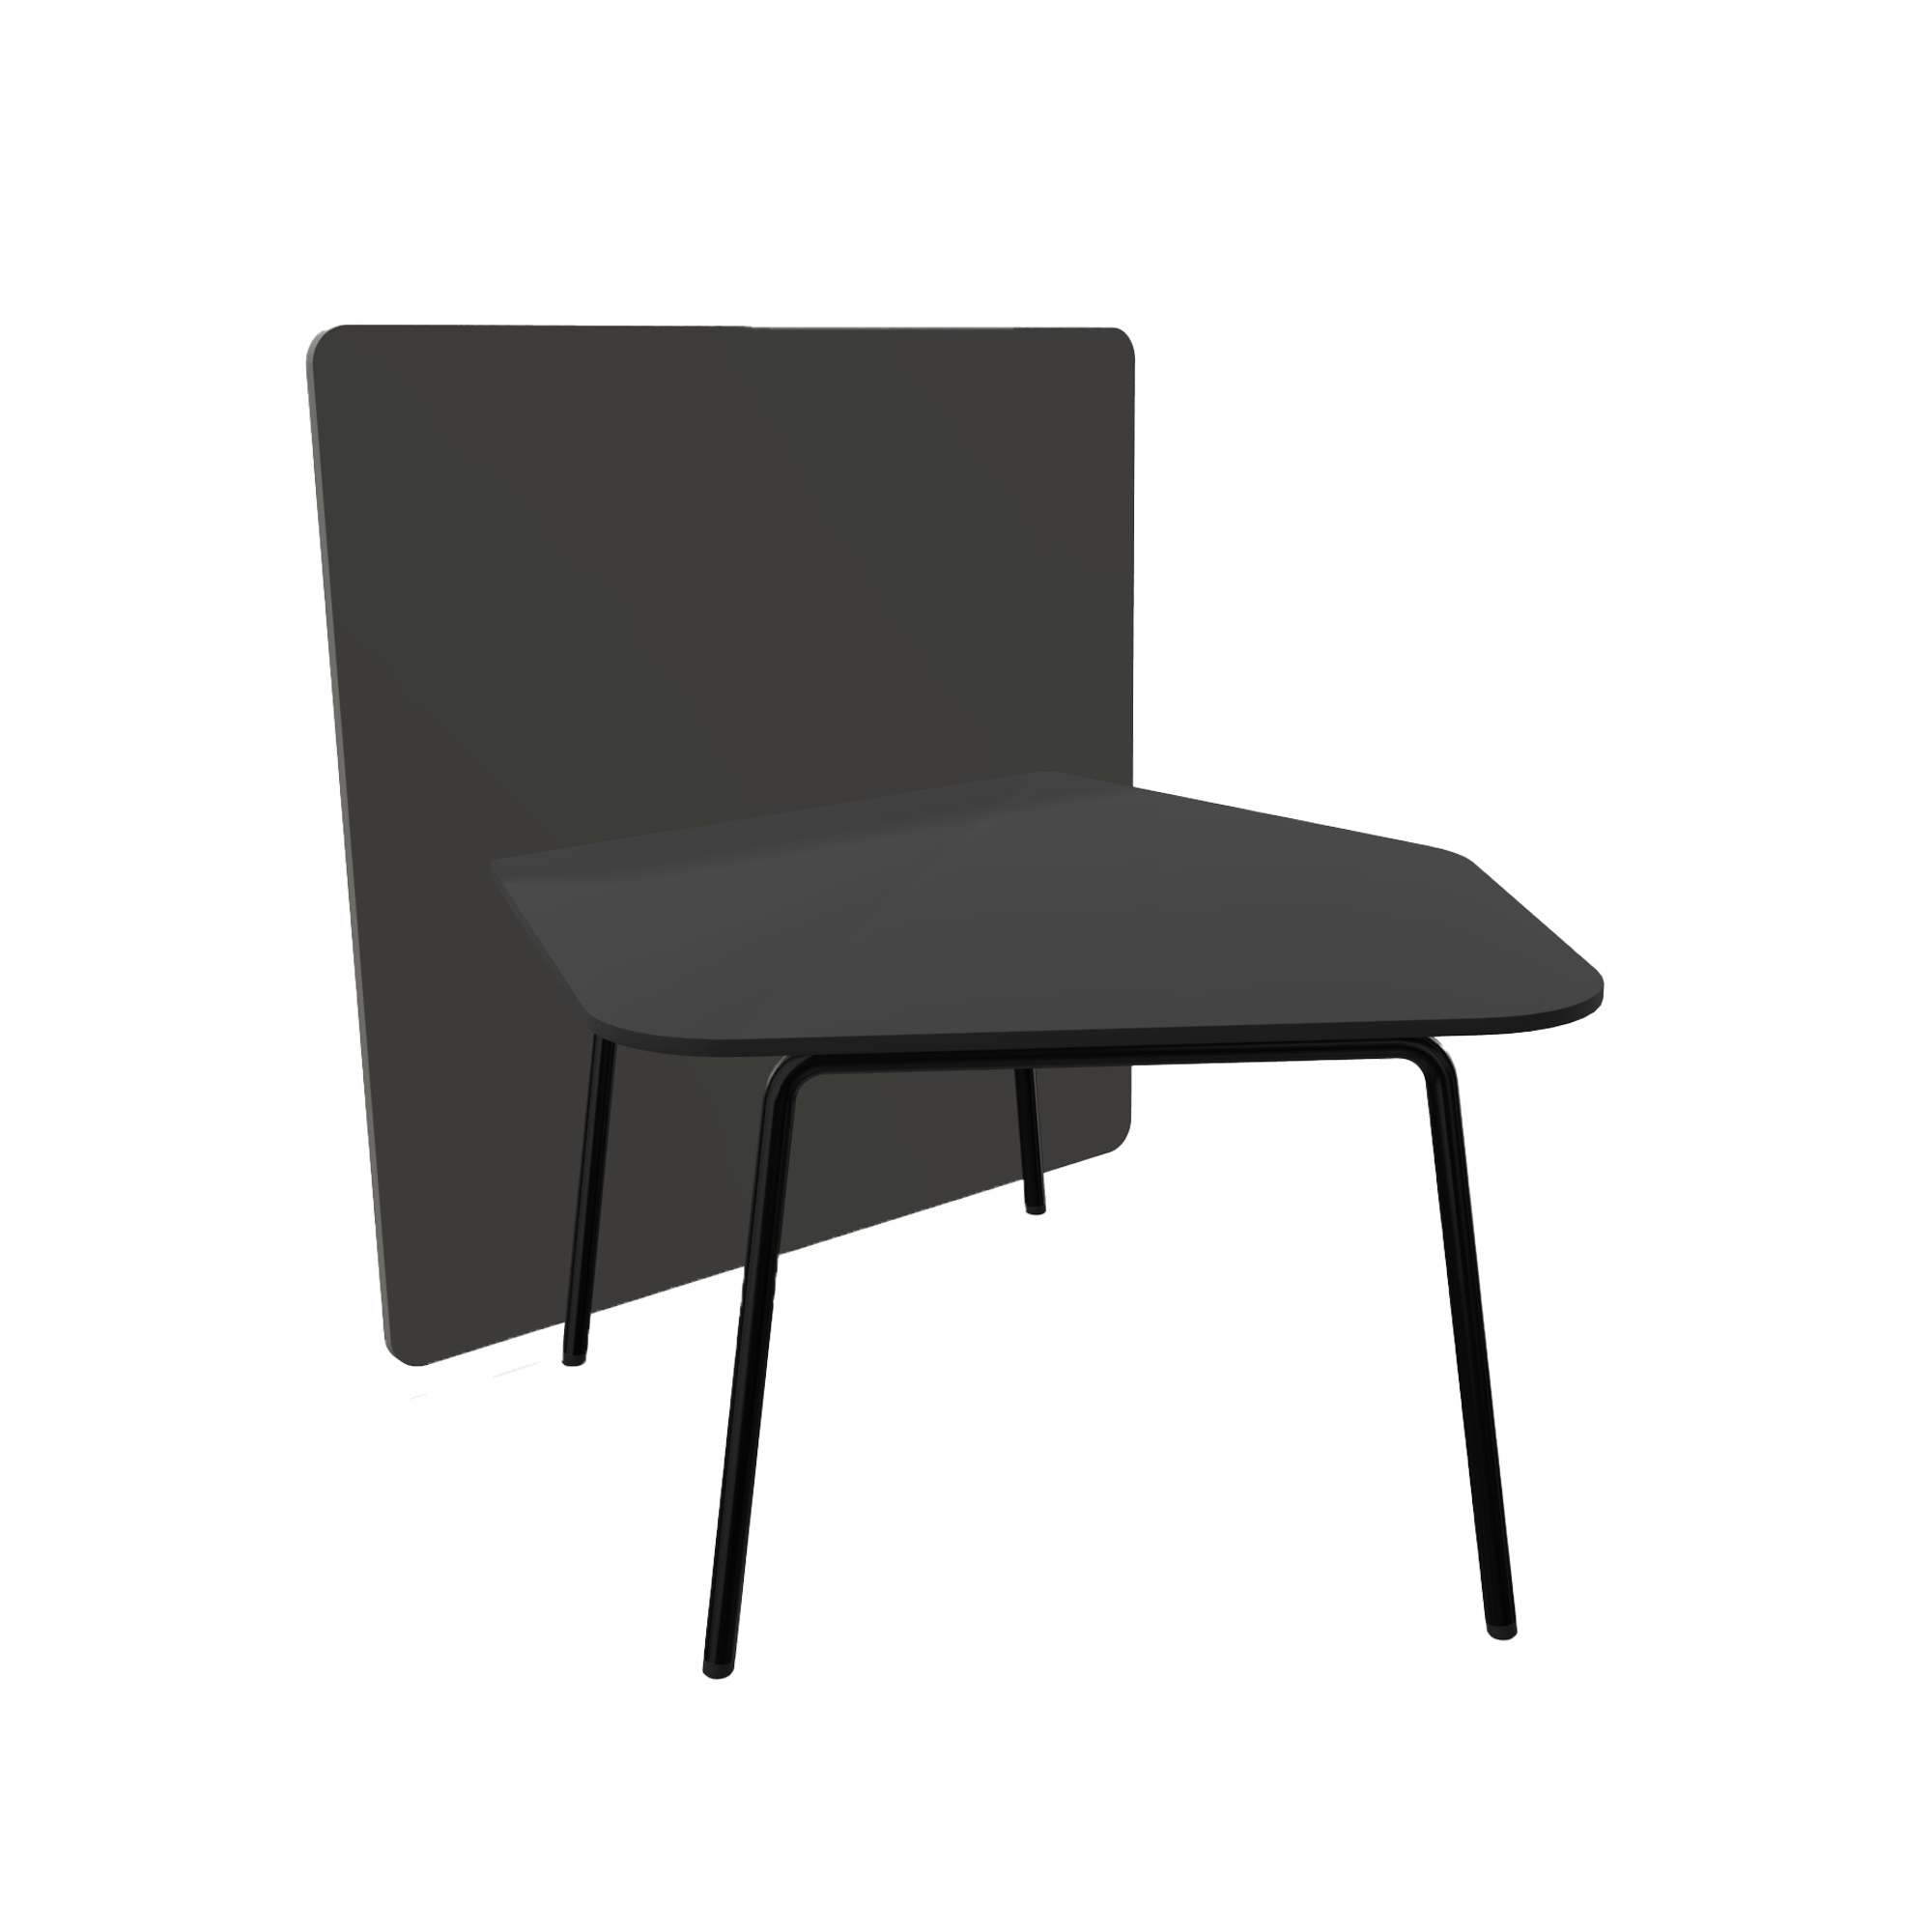 A black table with black legs and a black office screen divider attached to one side